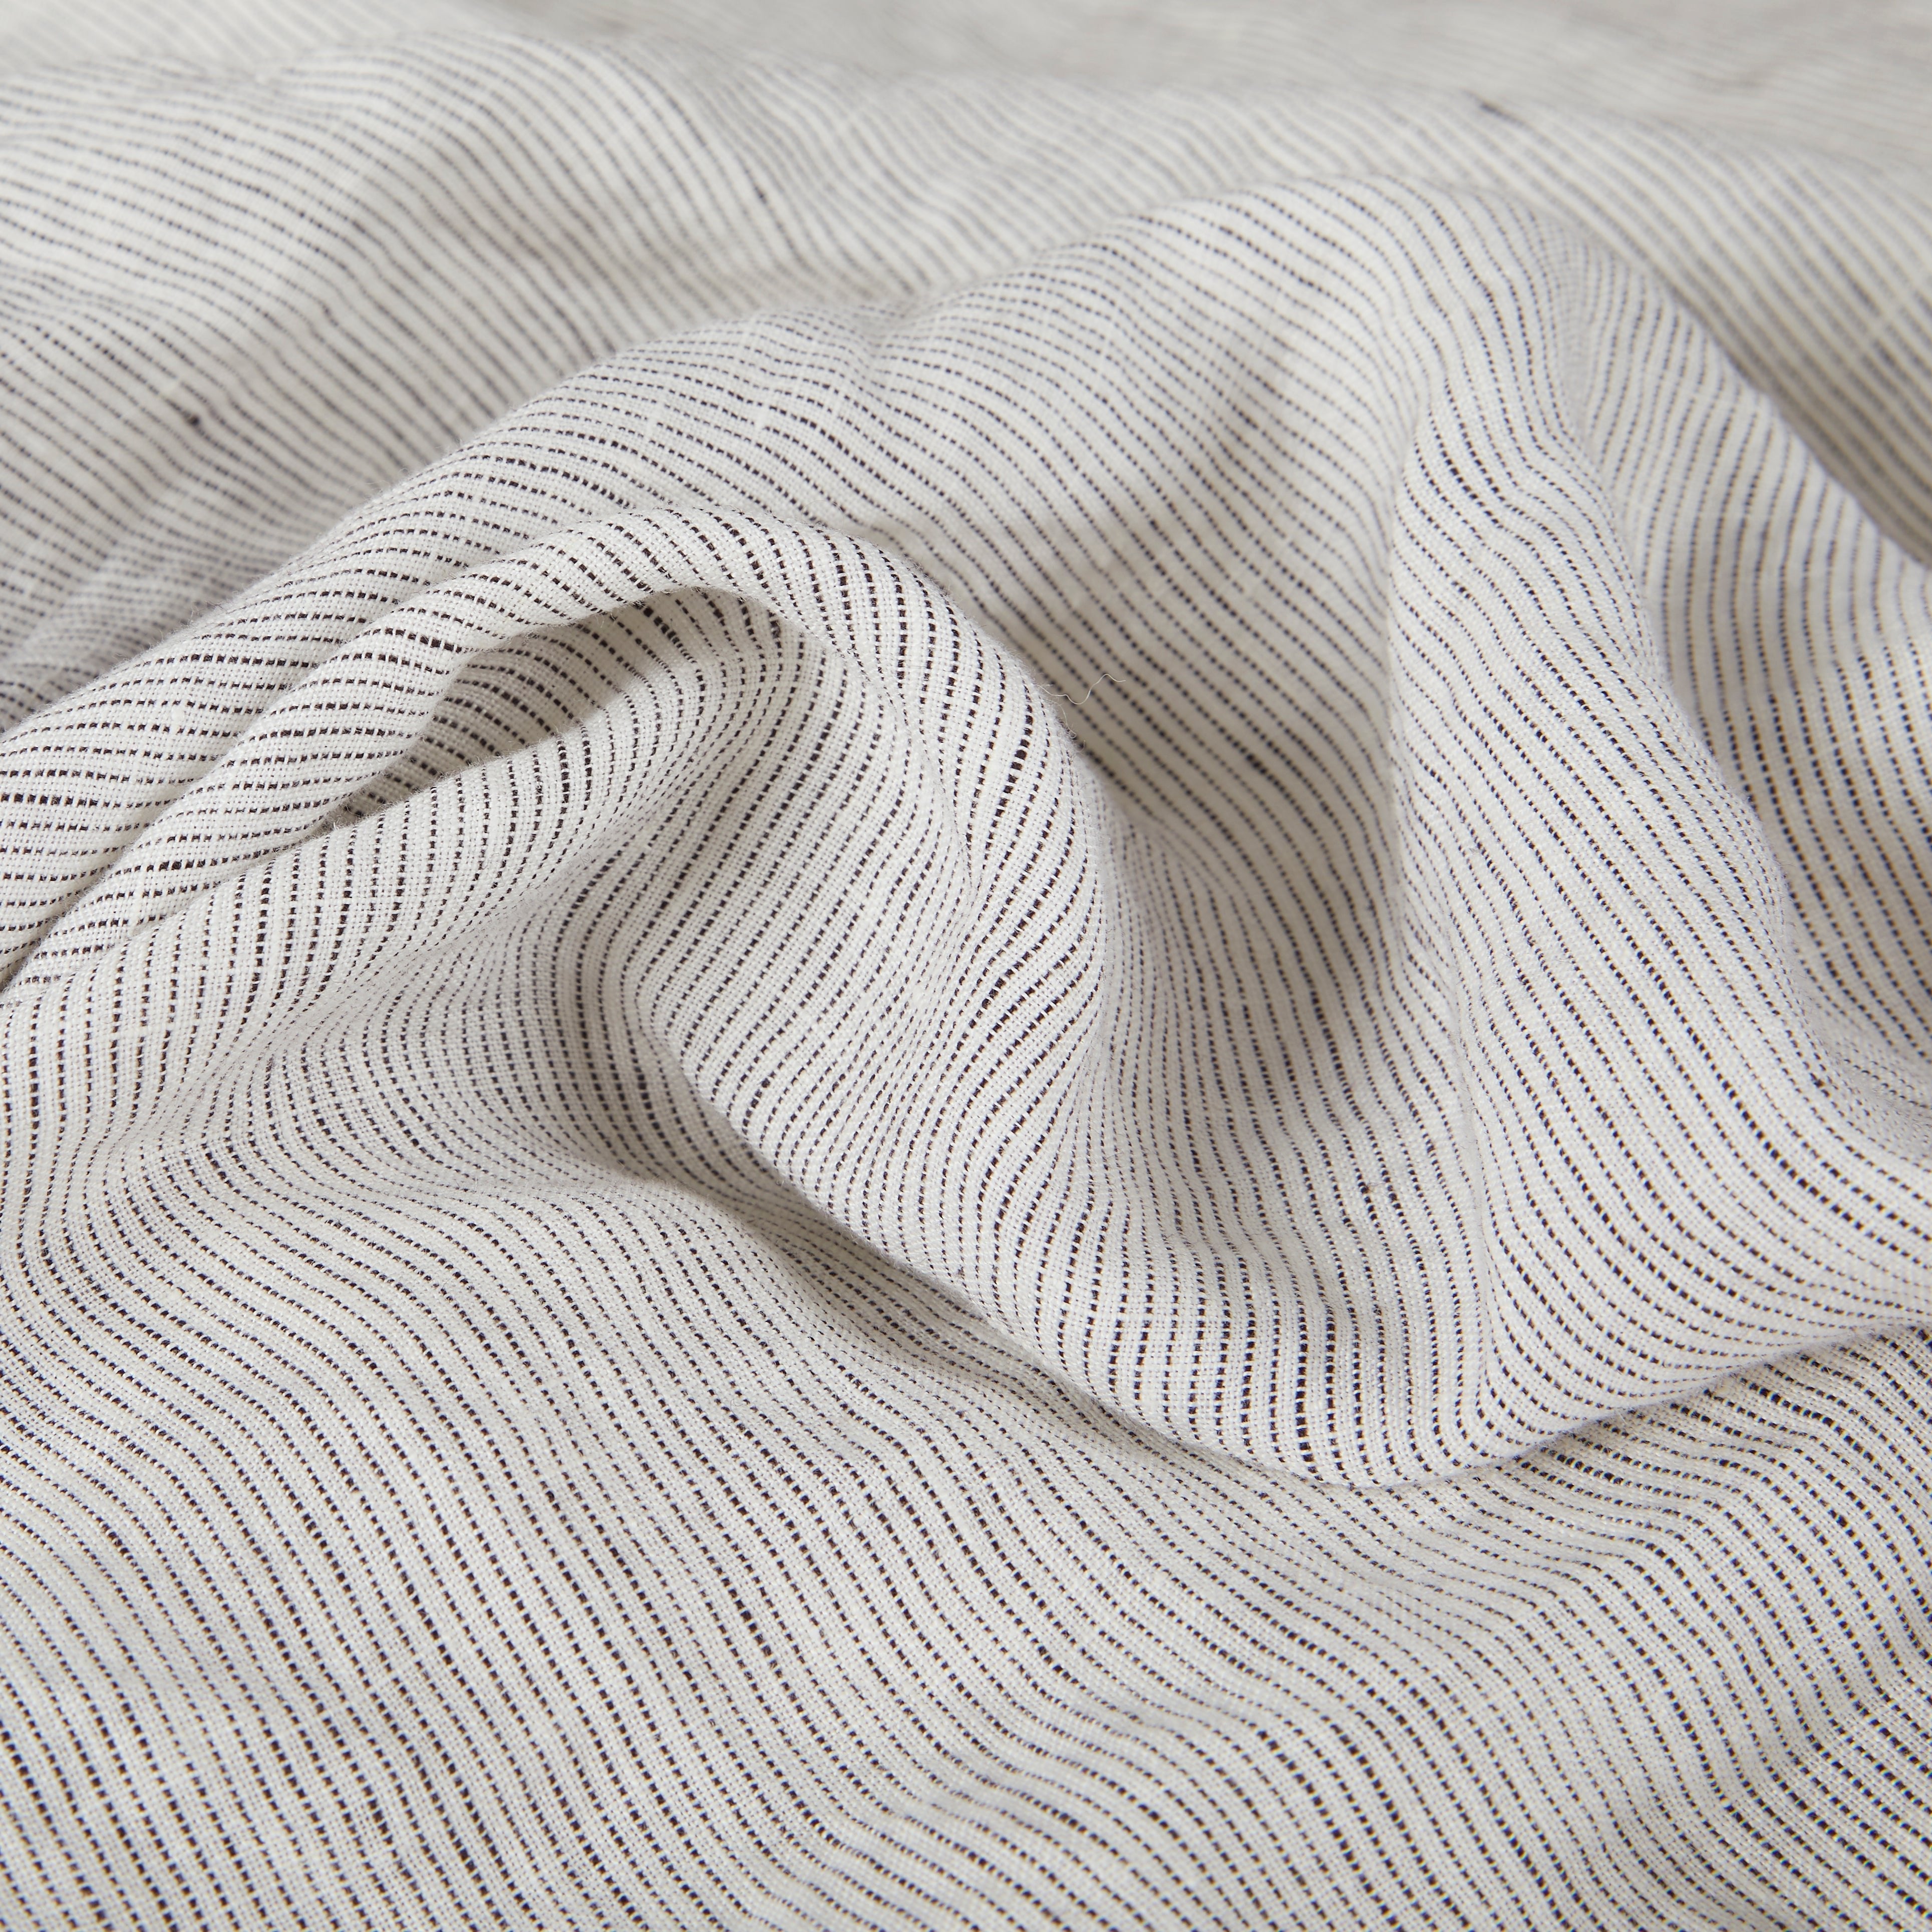 Stonewashed linen gray striped detail - By Native